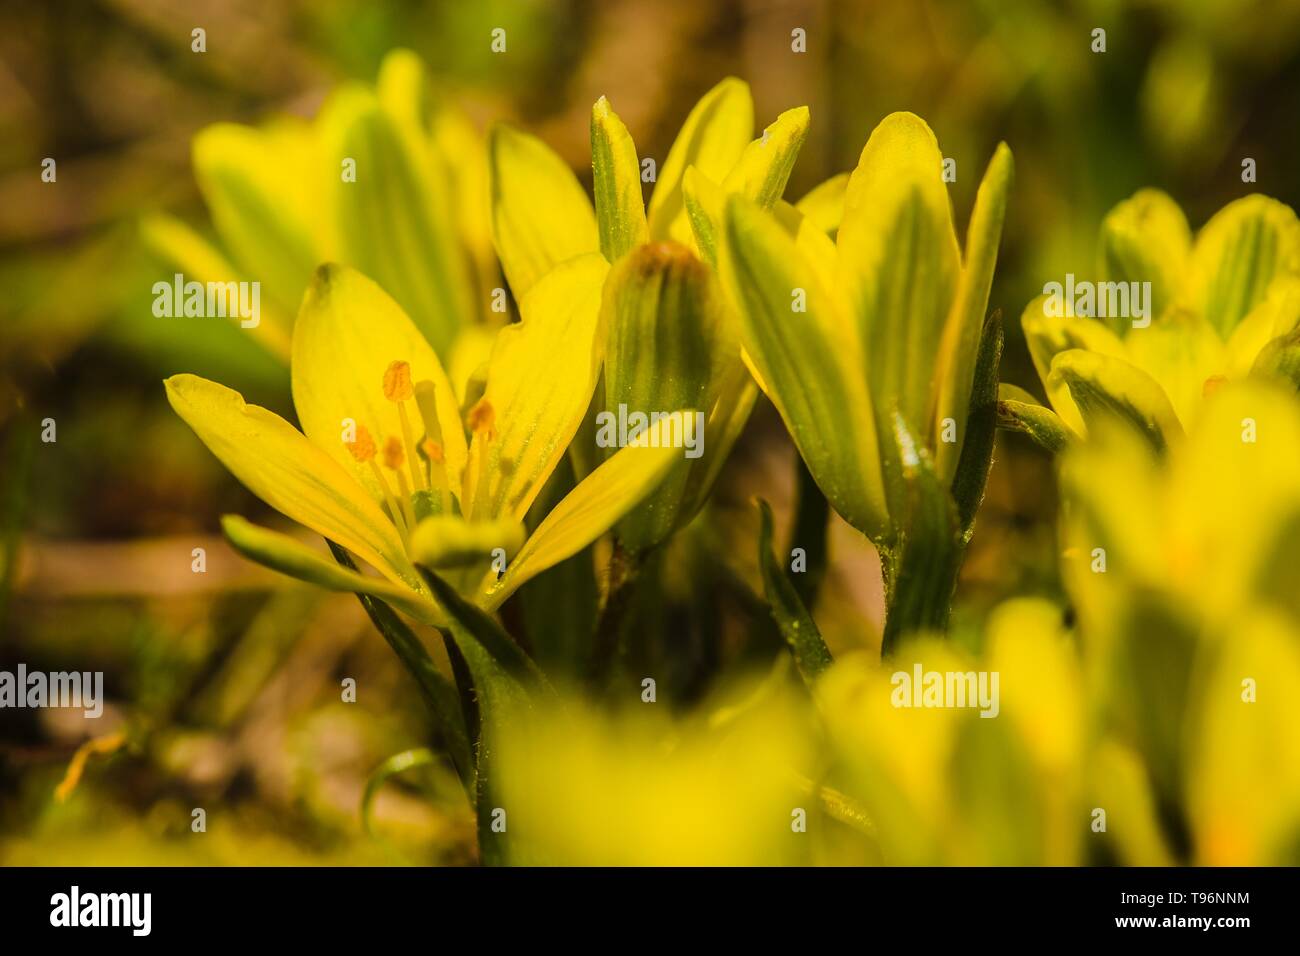 Close up image of fresh bright yellow and green lilly flowers, also called hairy star of Bethlehem flower. Sunny spring day in a garden. Stock Photo